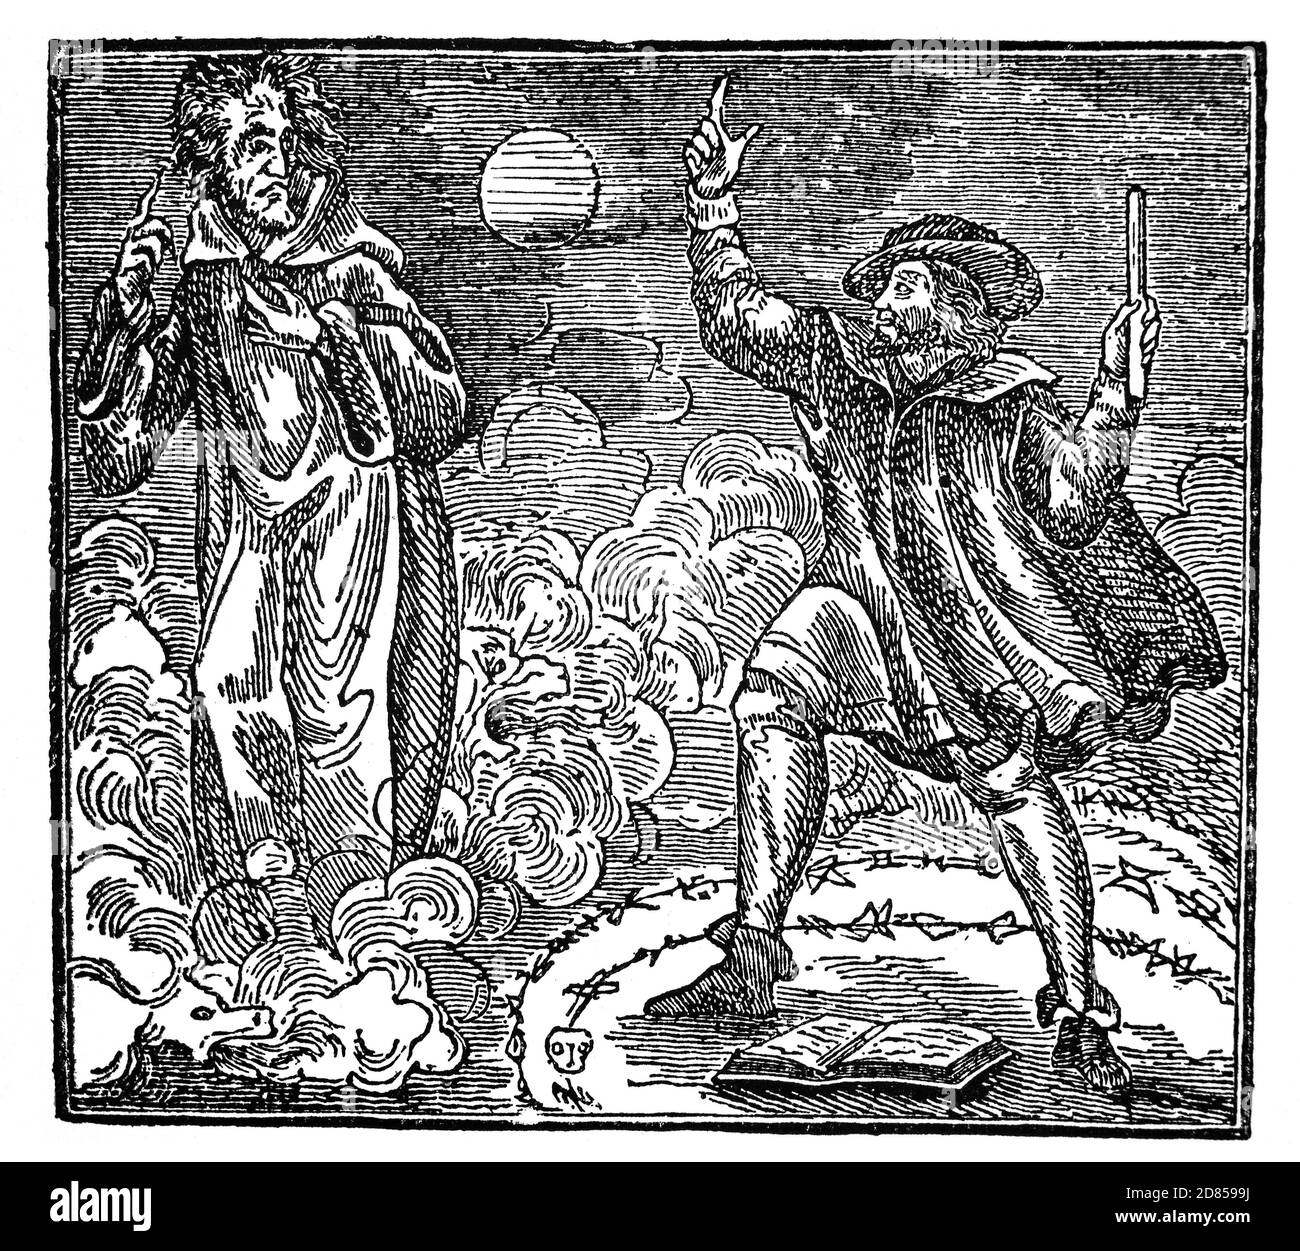 A 19th Century illustration of Faust, aka Doctor Faustus, a German necromancer or astrologer and hero of one of the most durable legends in Western folklore and literature, raising the devil before selling his soul in exchange for knowledge and power. Stock Photo